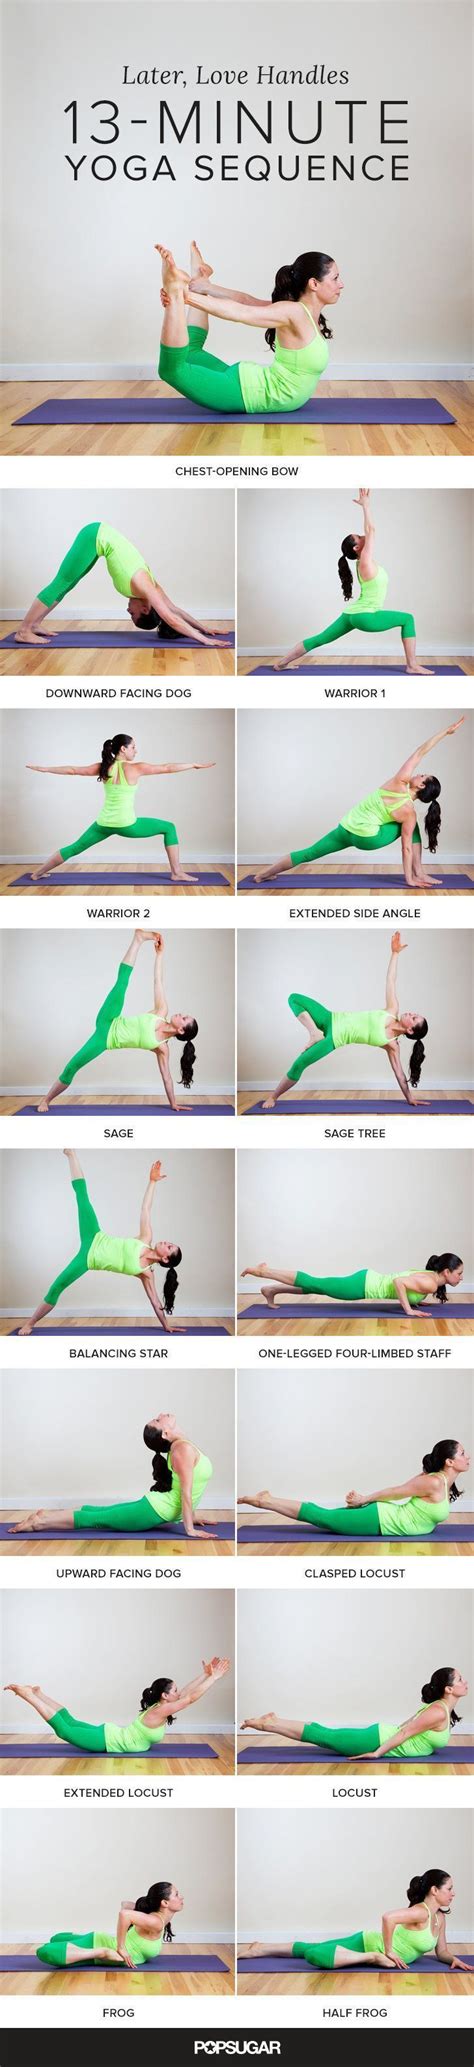 Let Go Of Those Love Handles A Yoga Sequence To Help Tone Your Tummy